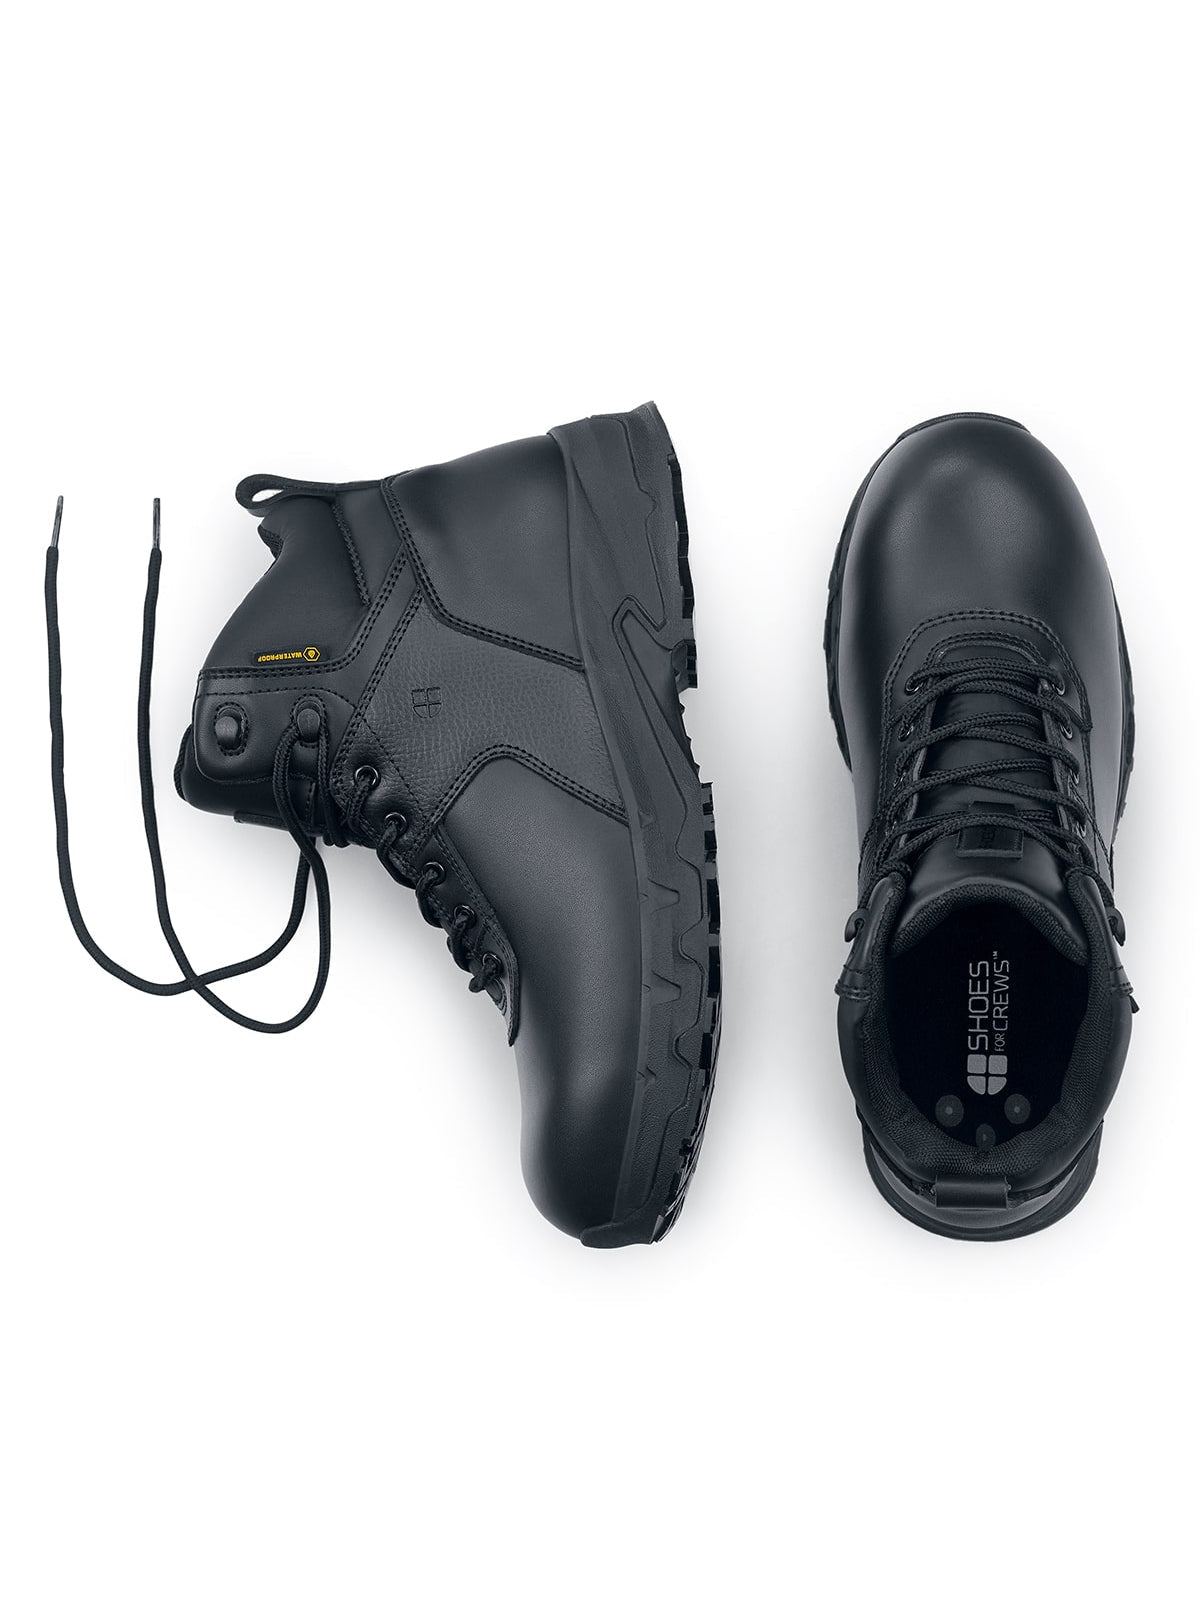 Unisex Work Shoe Engineer Iii (S2) by Shoes For Crews -  ChefsCotton